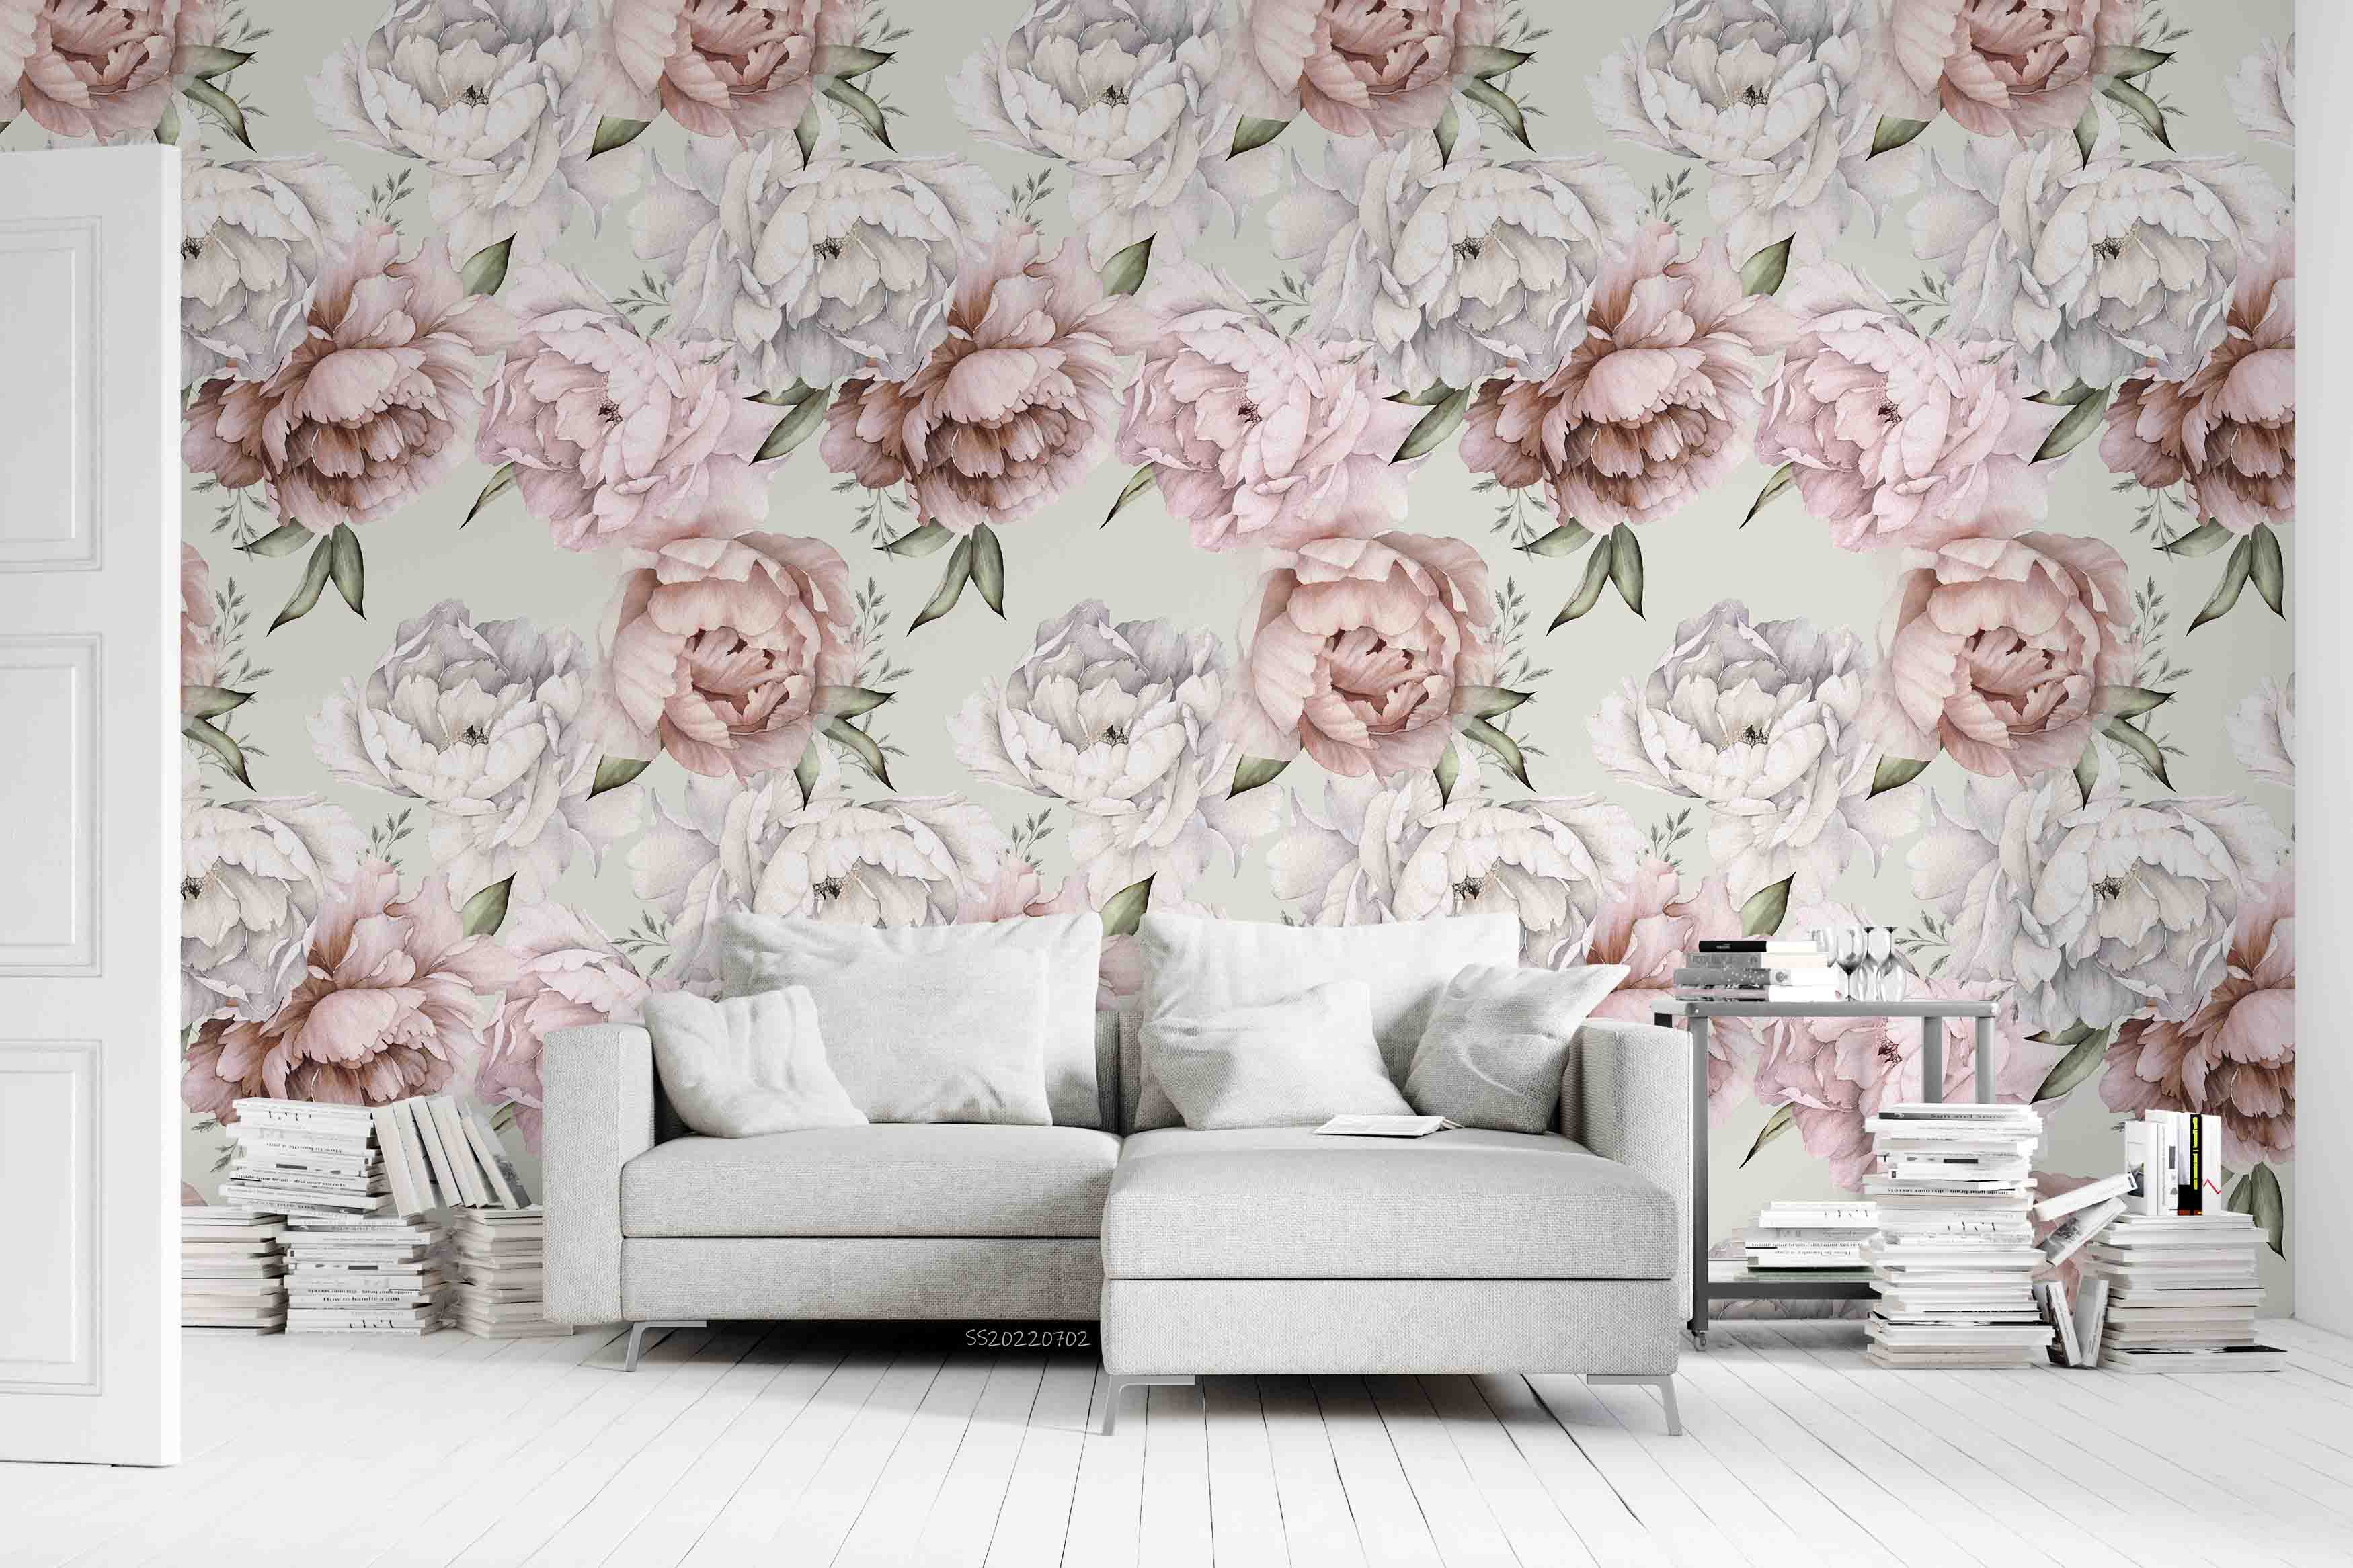 3D Vintage Peony Floral Background Wall Mural Wallpaper GD 5096- Jess Art Decoration